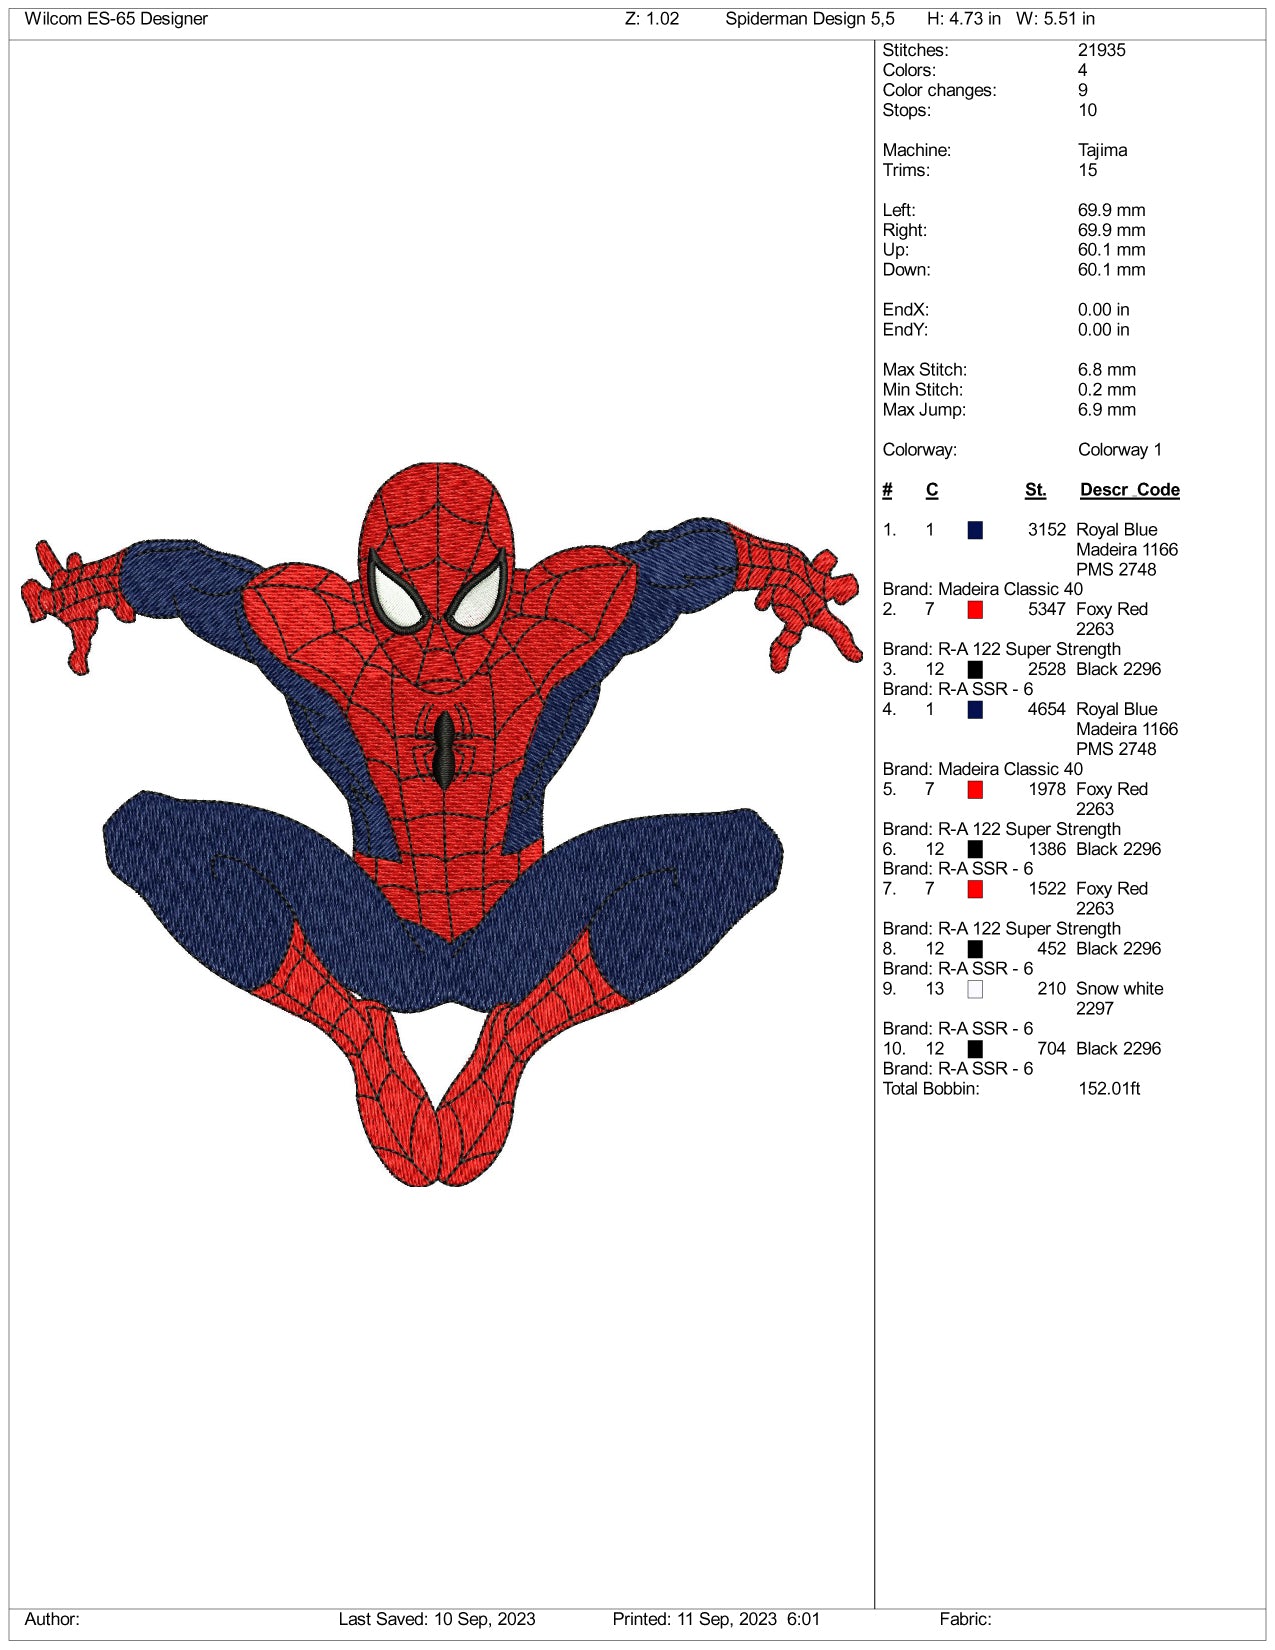 Spider Man Embroidery Design Files - 3 Size's